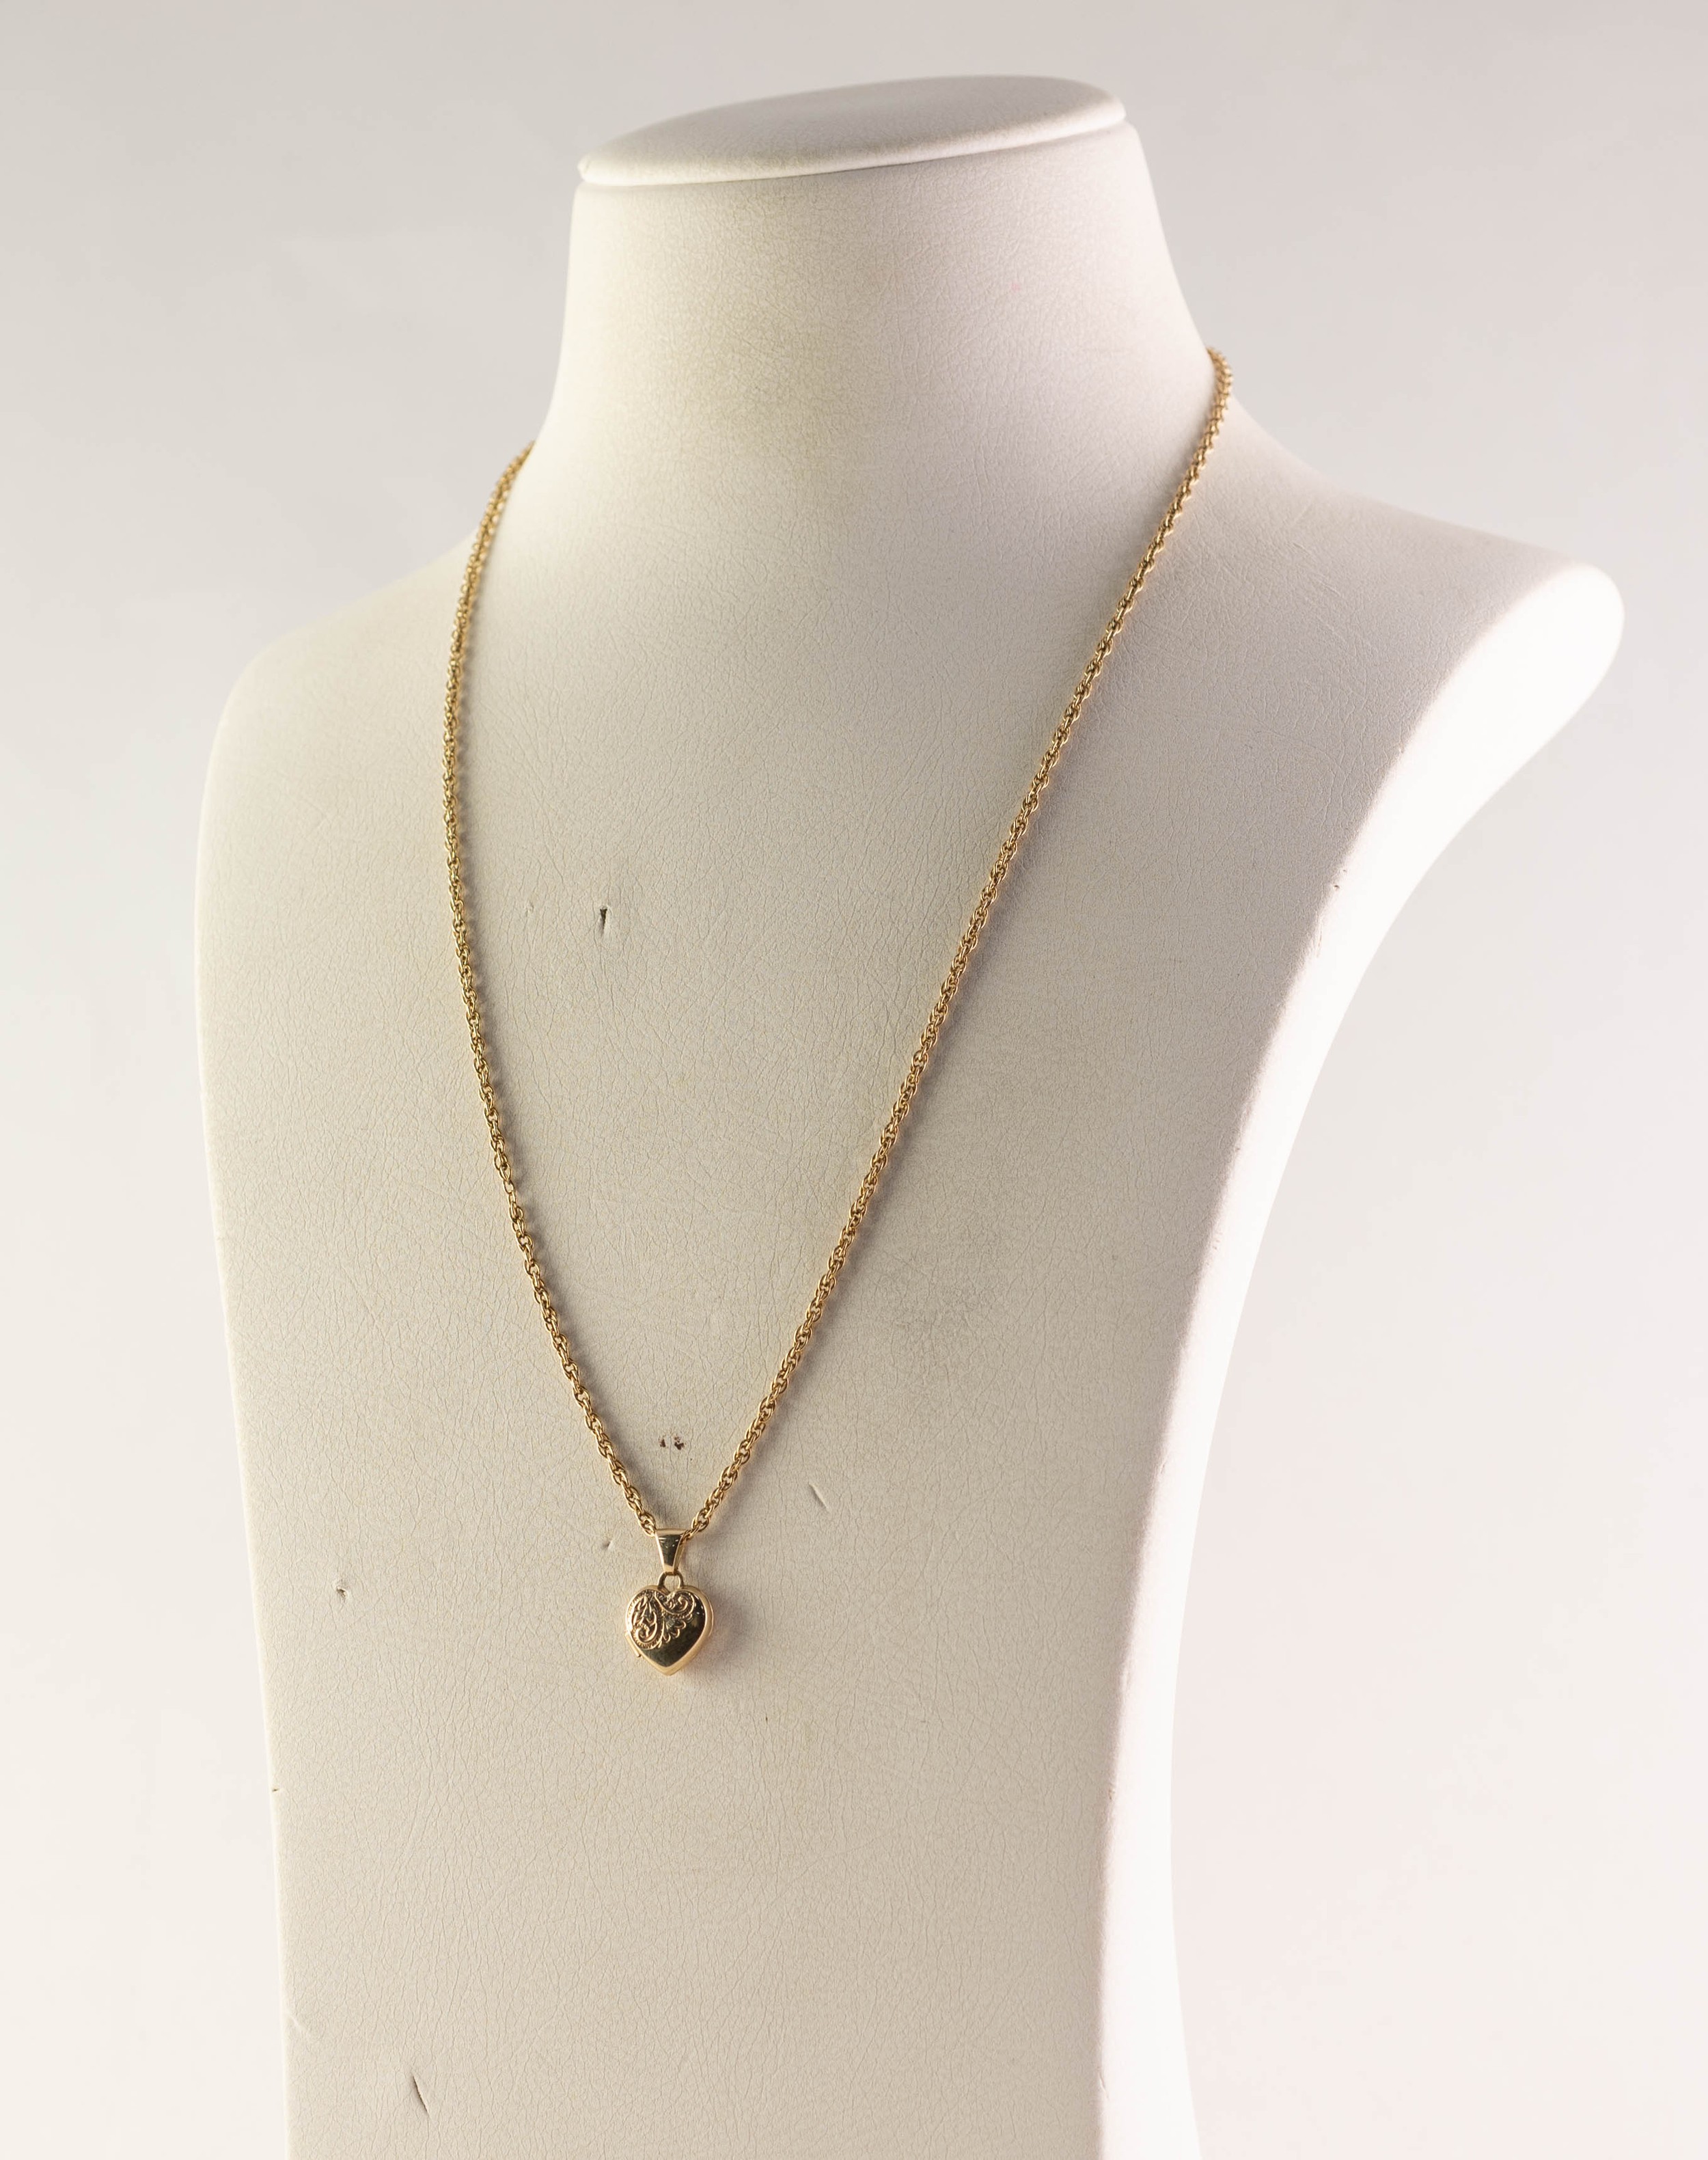 9ct GOLD FINE CHAIN NECKLACE, 17 1/2in (44.4cm) long, with tiny, heart shaped LOCKET PENDANT,